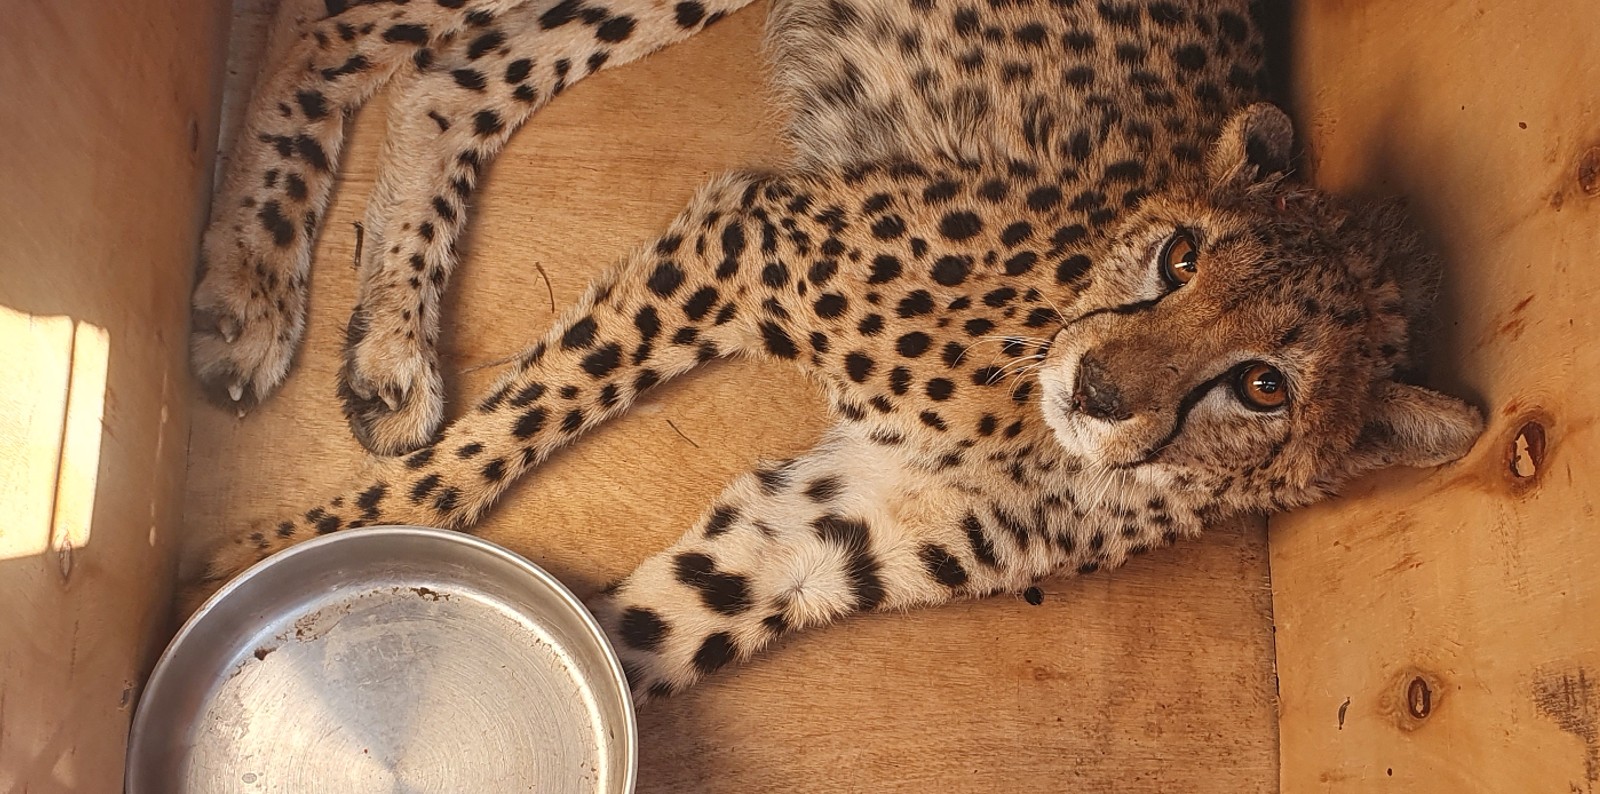 A photo of a young cheetah lying in a wooden travelling crate.